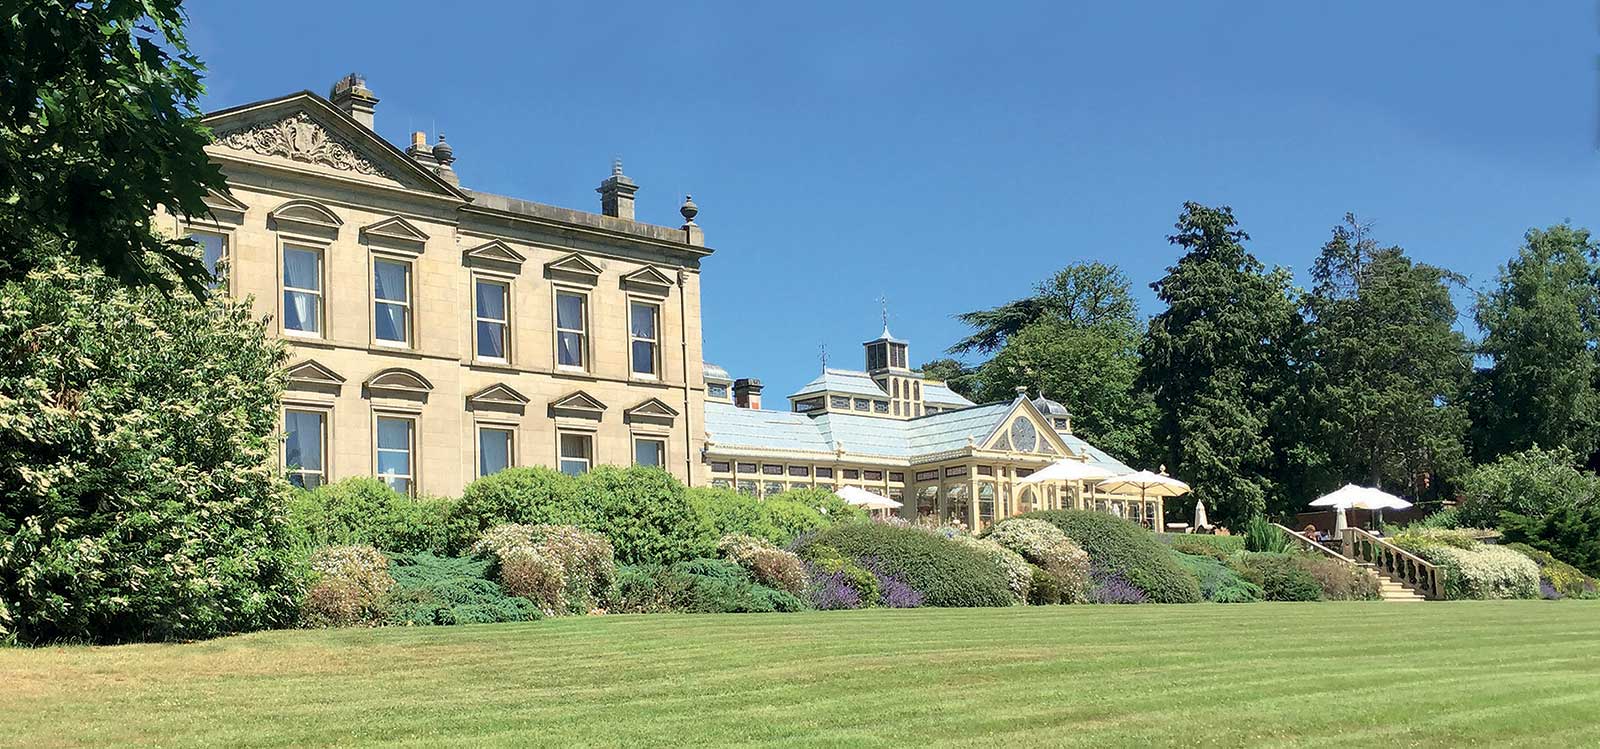 The outside of Kilworth House facing out on to the gardens